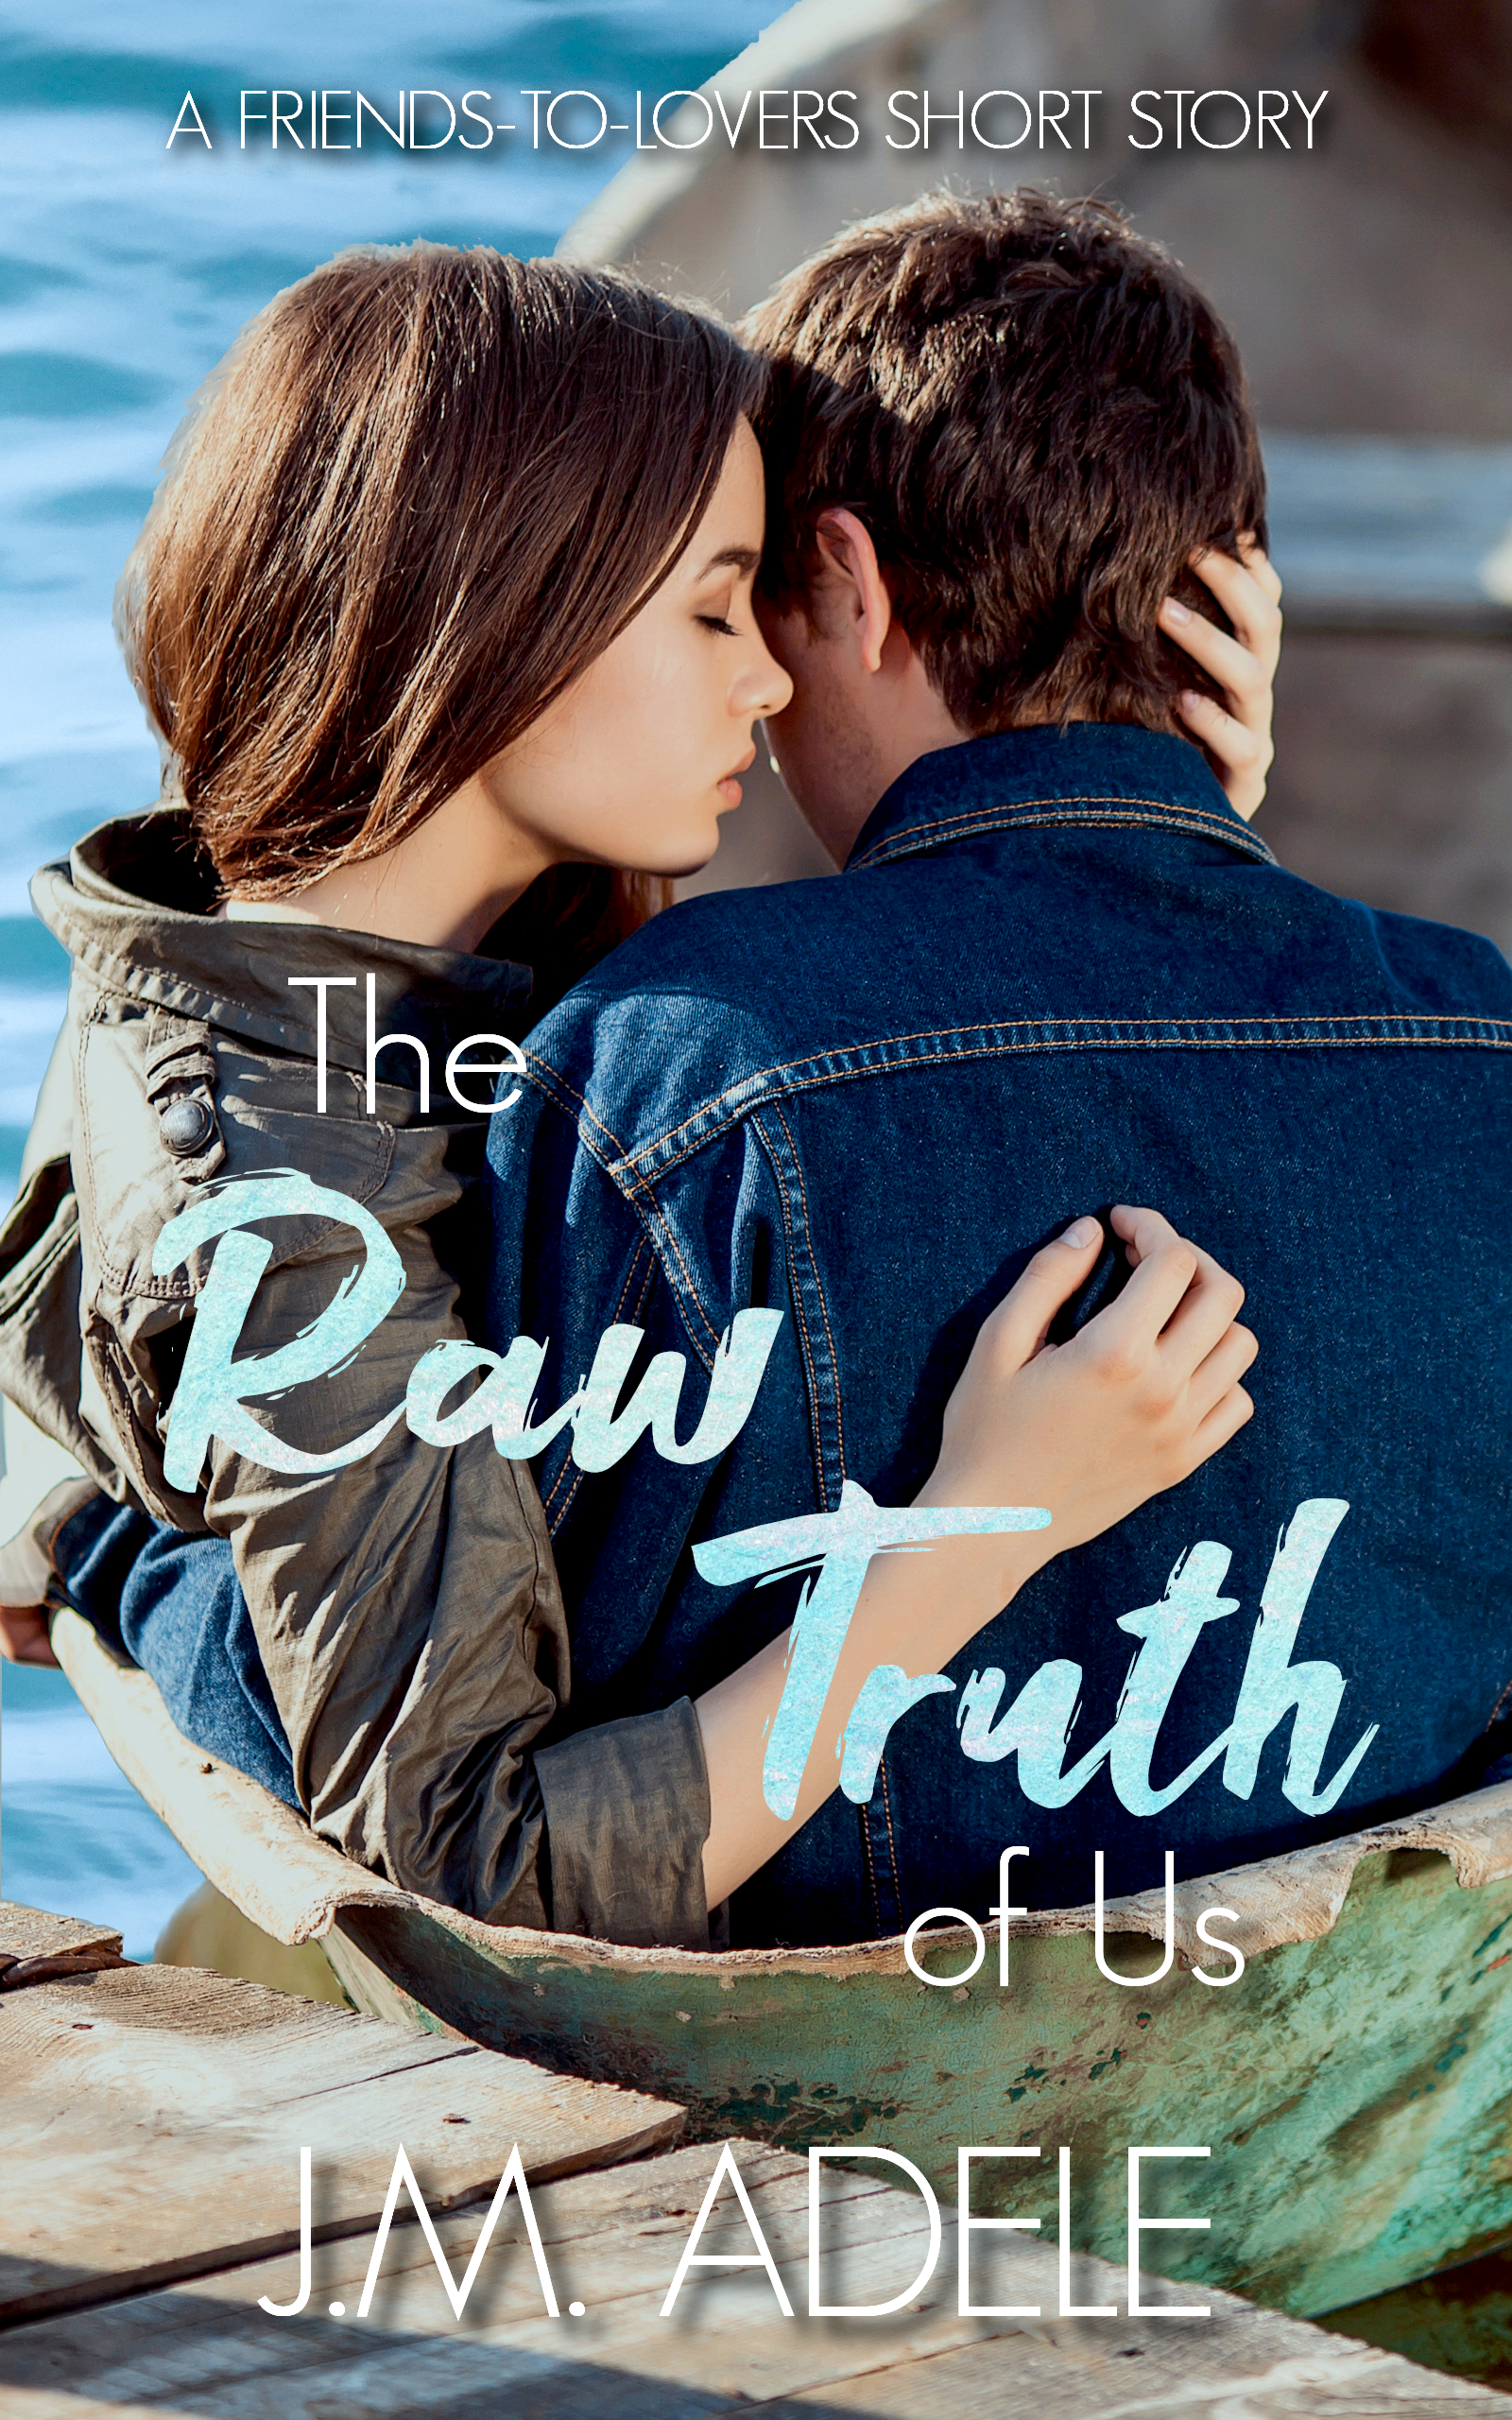 The Raw Truth of Us cover